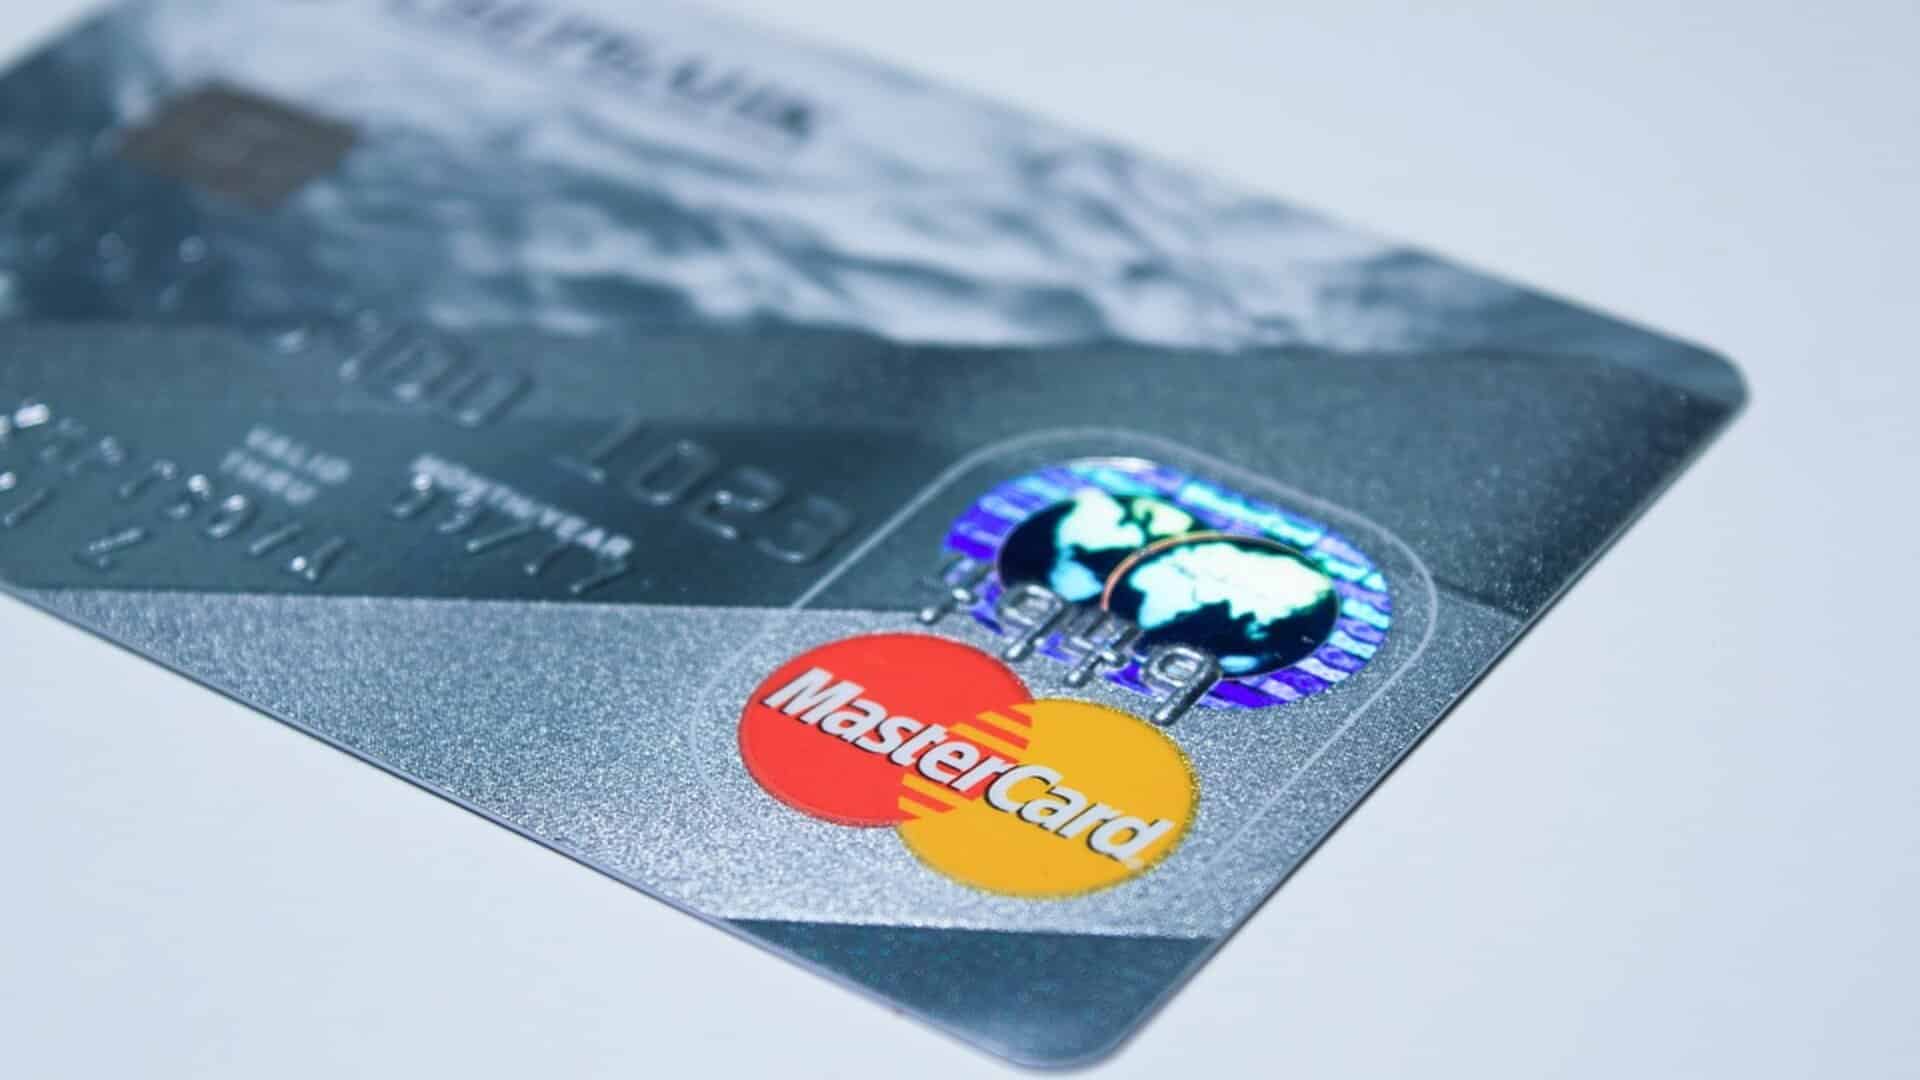 US trade official criticized India’s decision to ban Mastercard